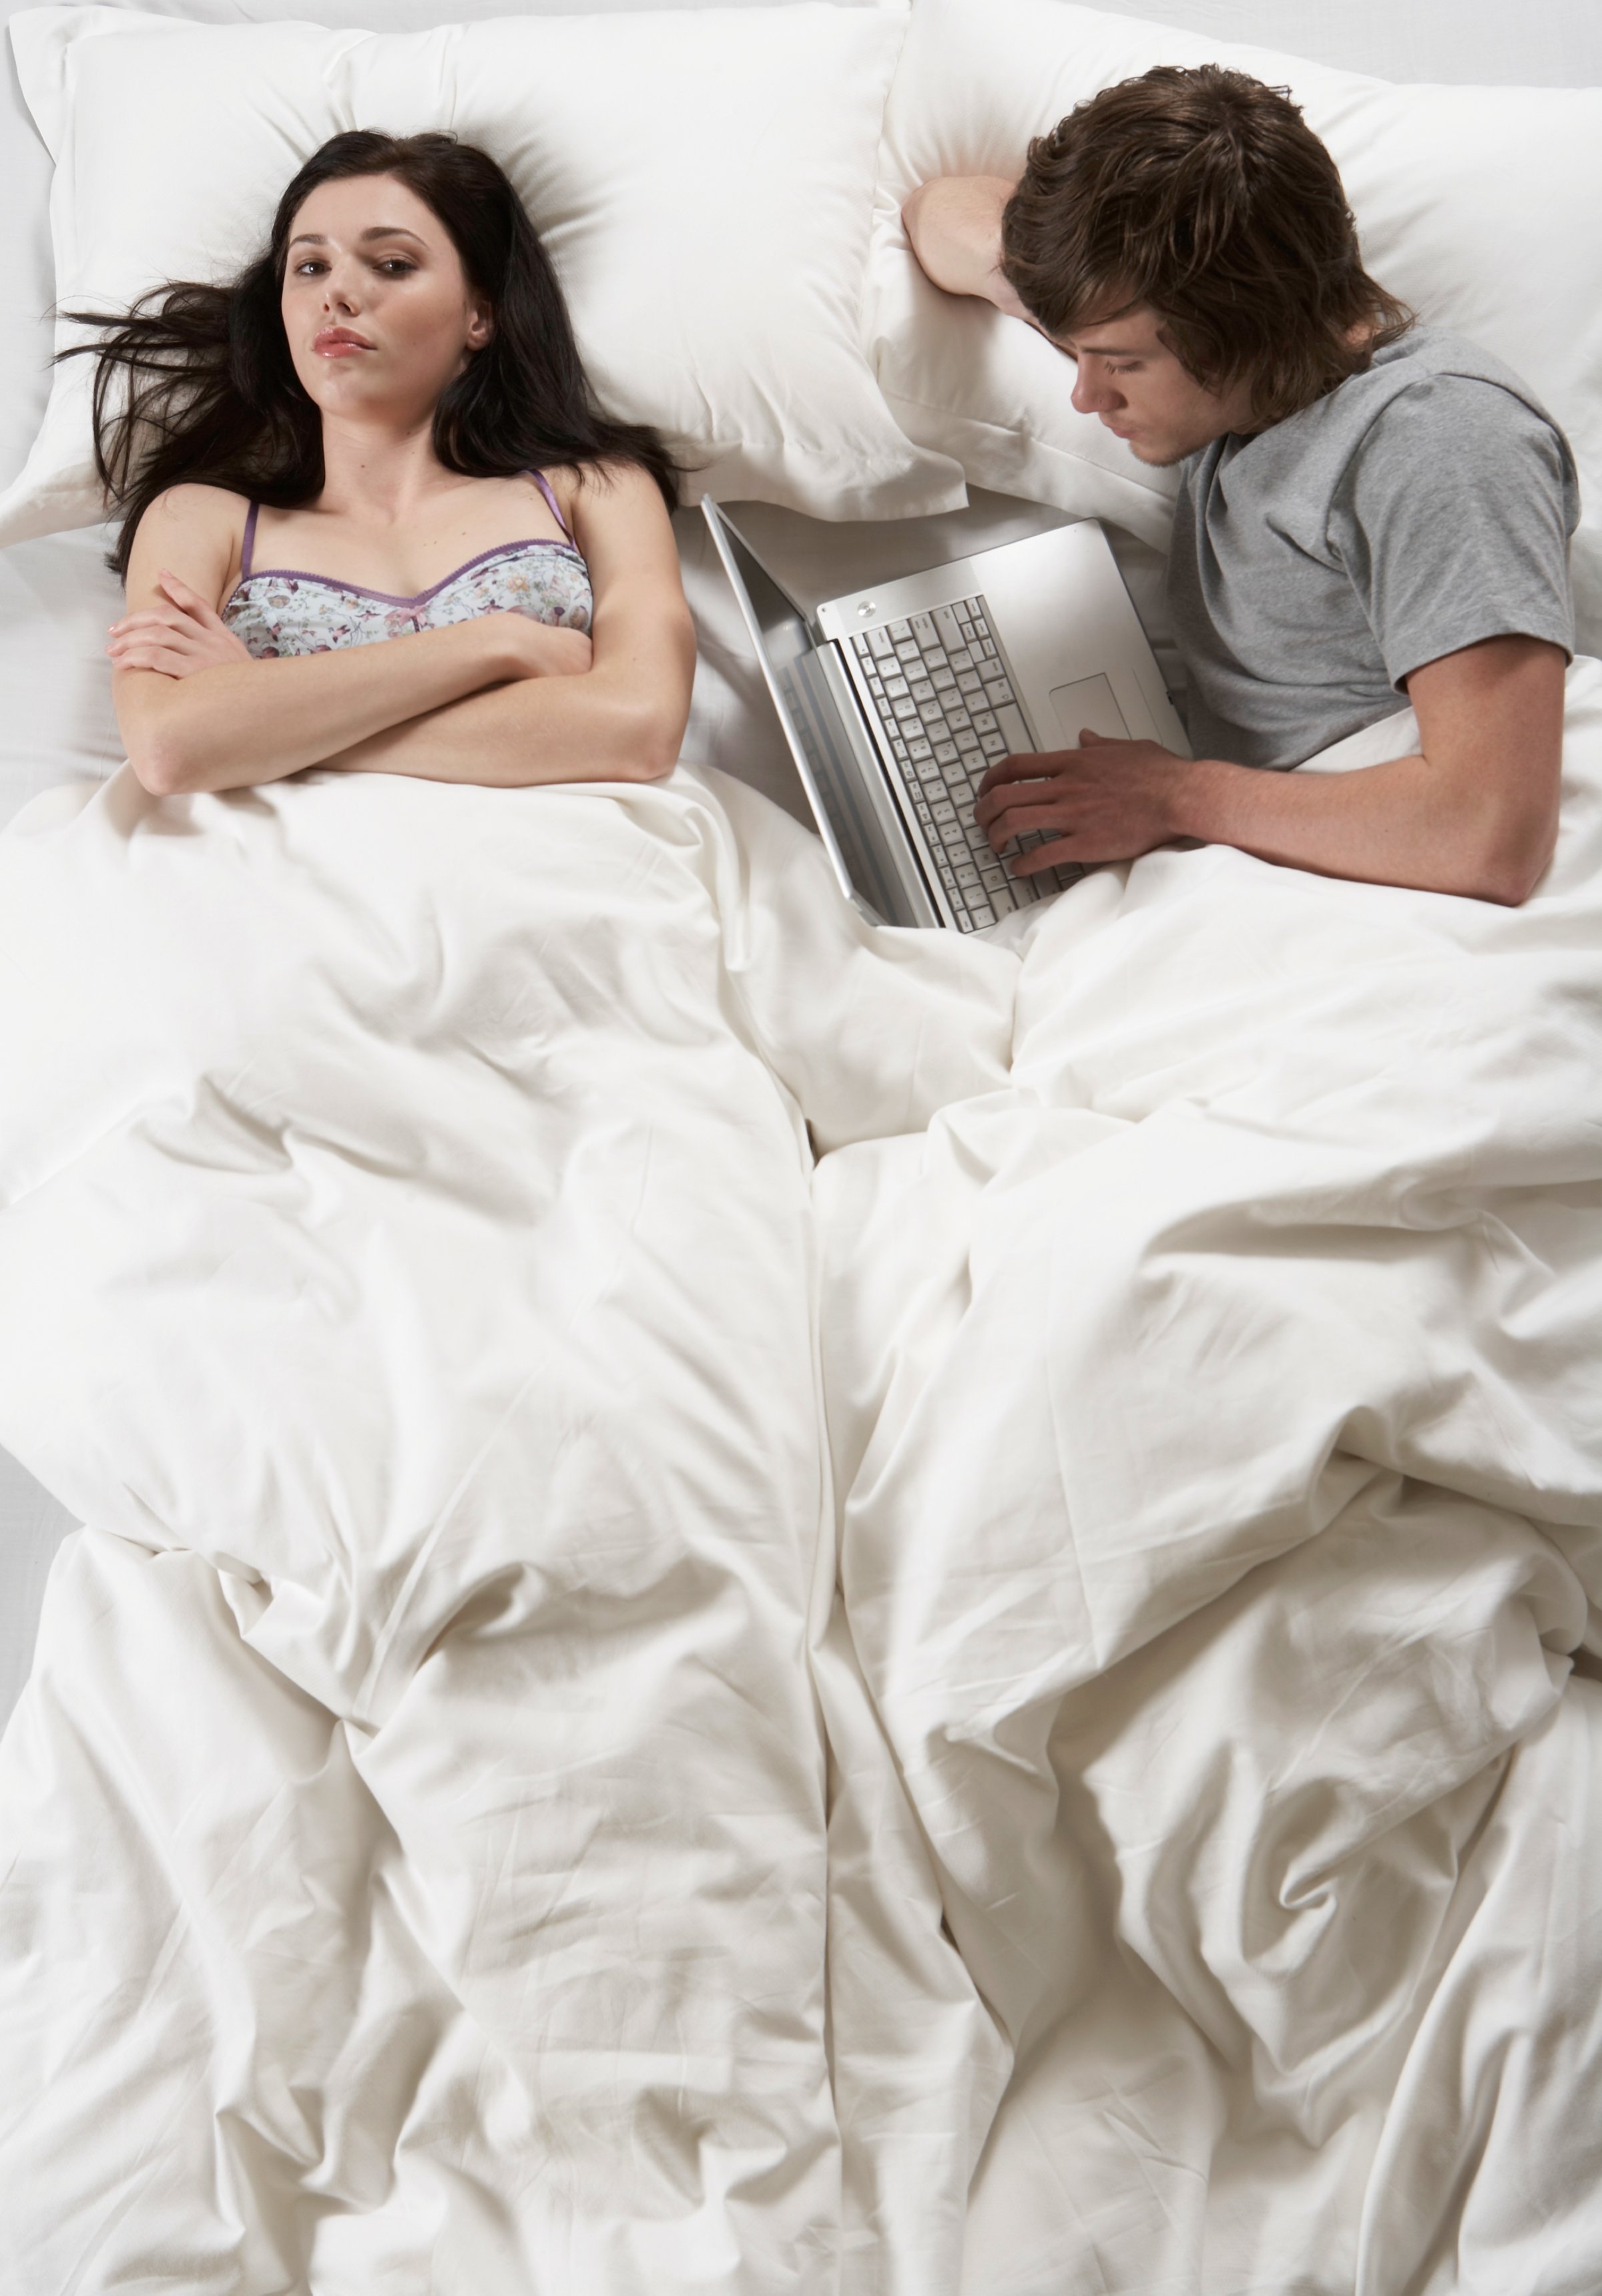 Young man and woman lying in bed, man using laptop, overhead view